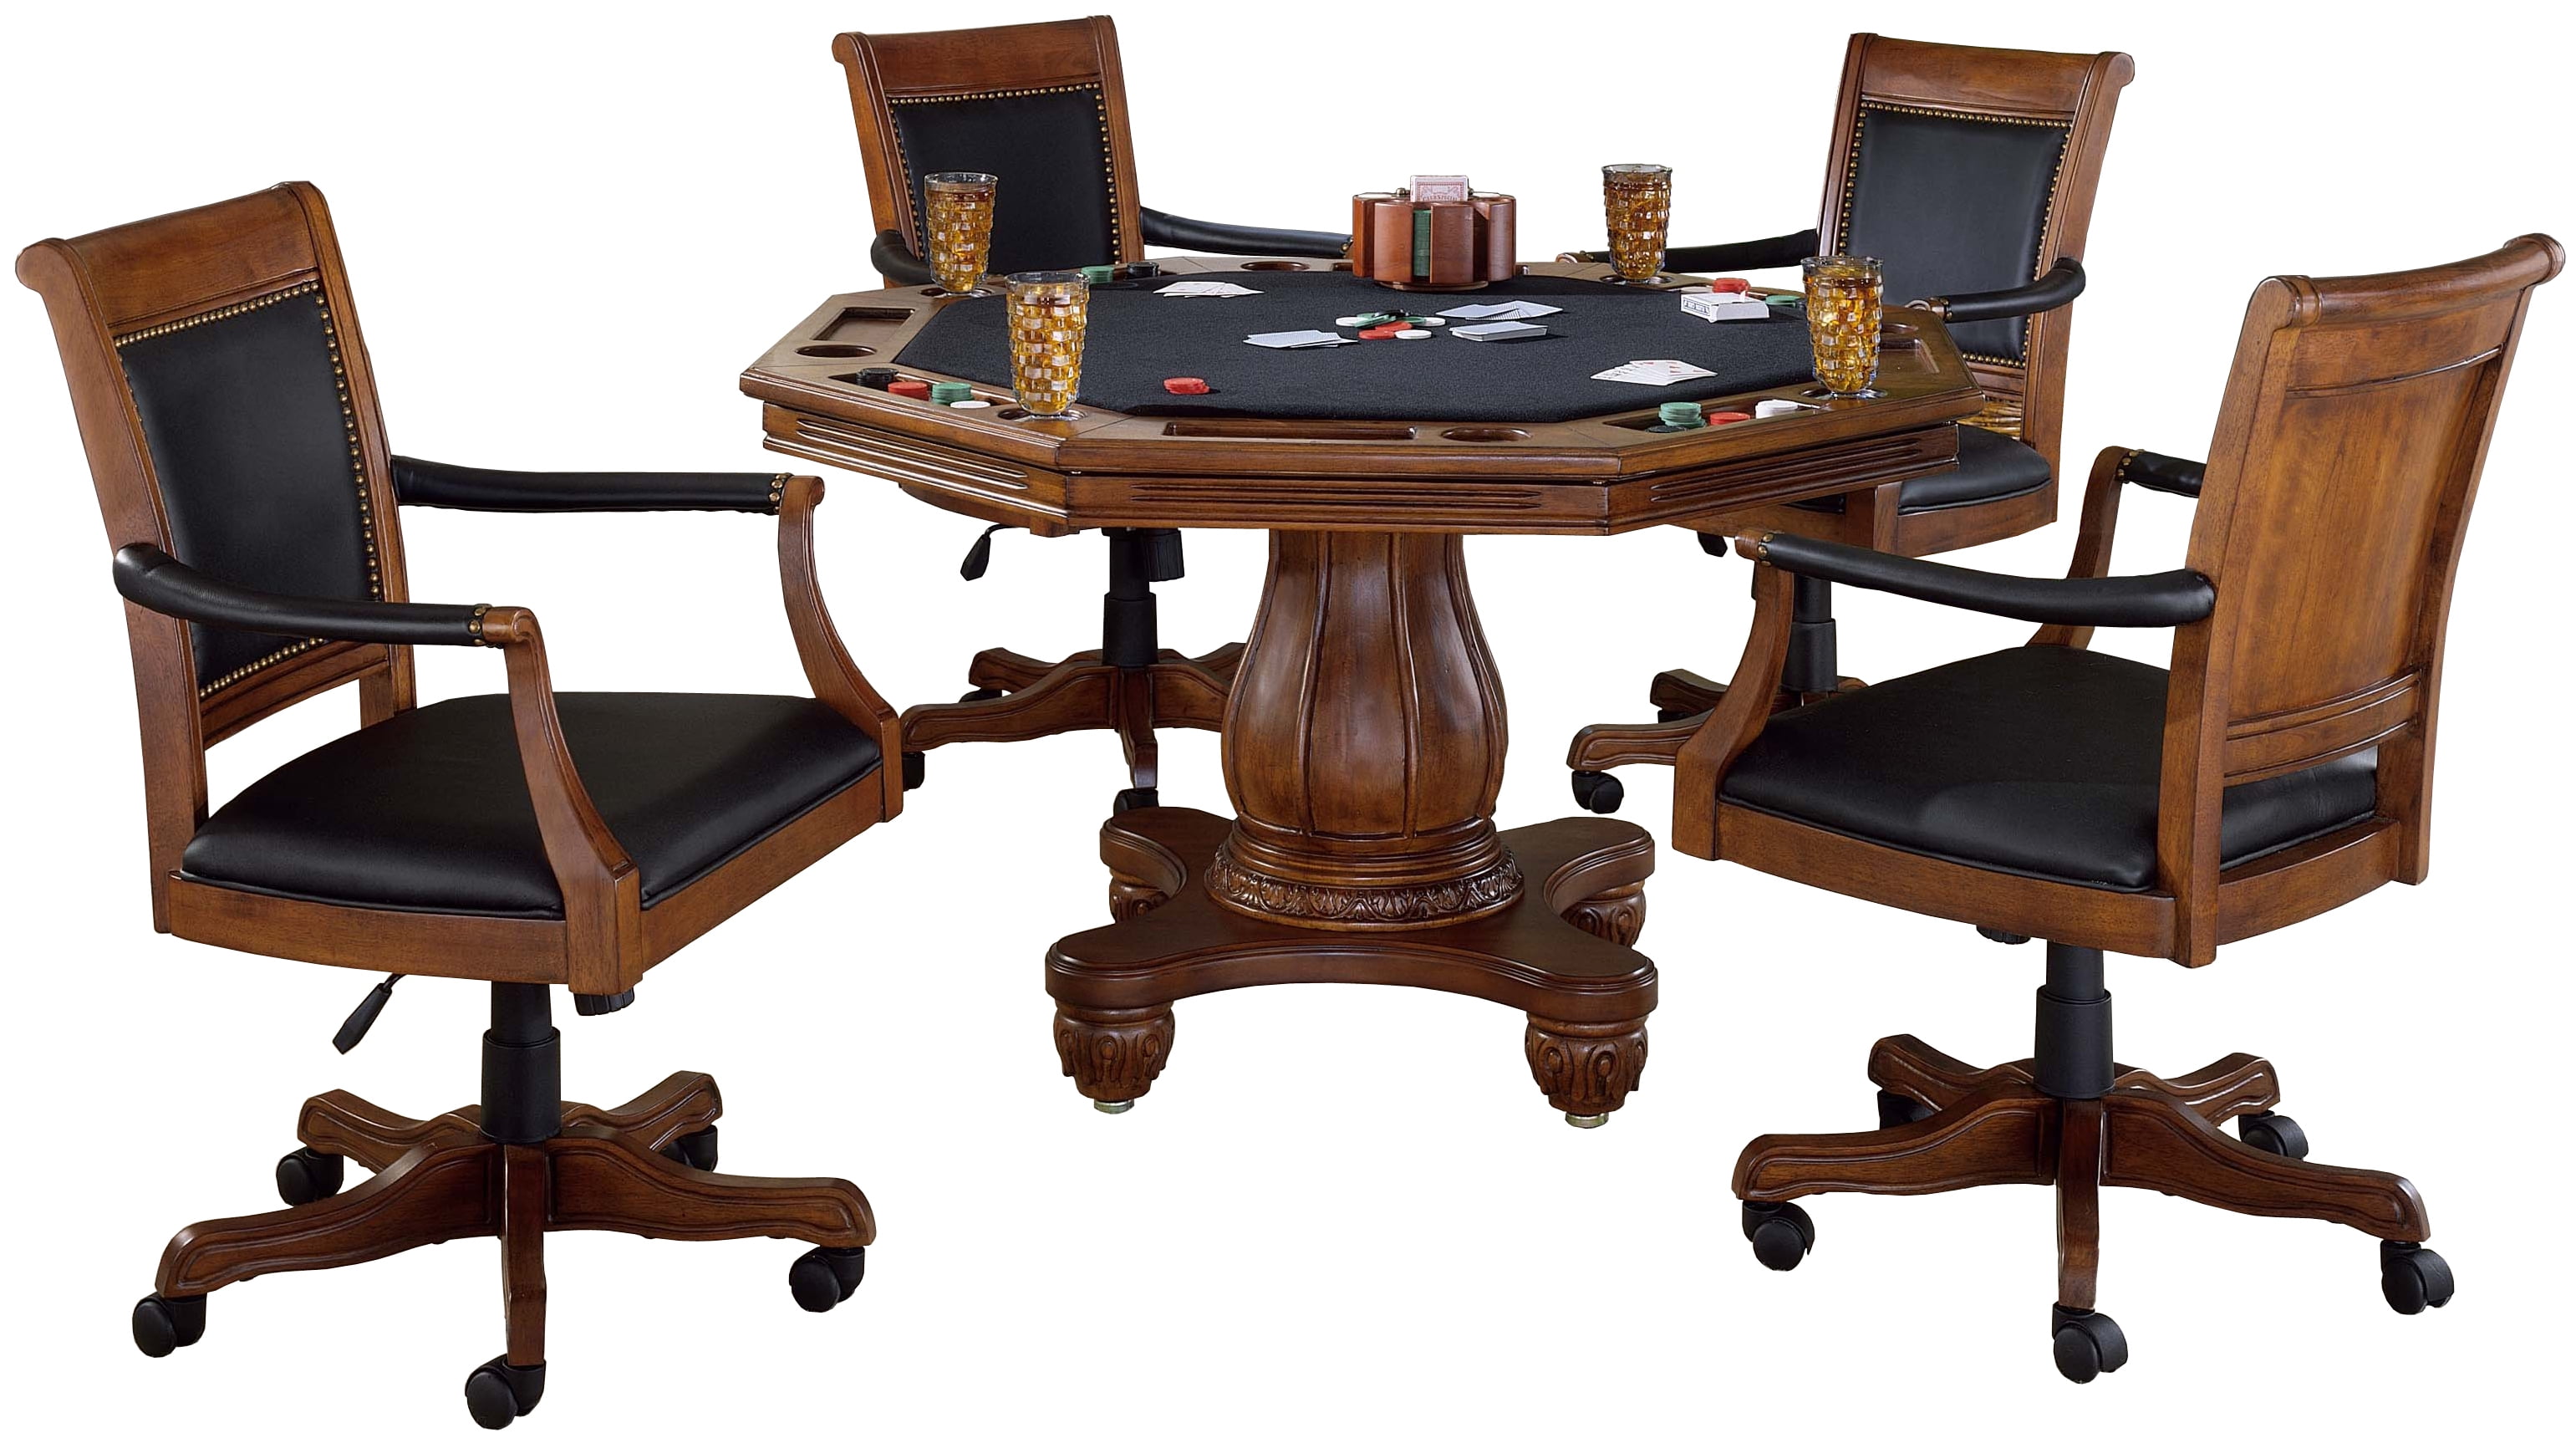 wooden game table for living room